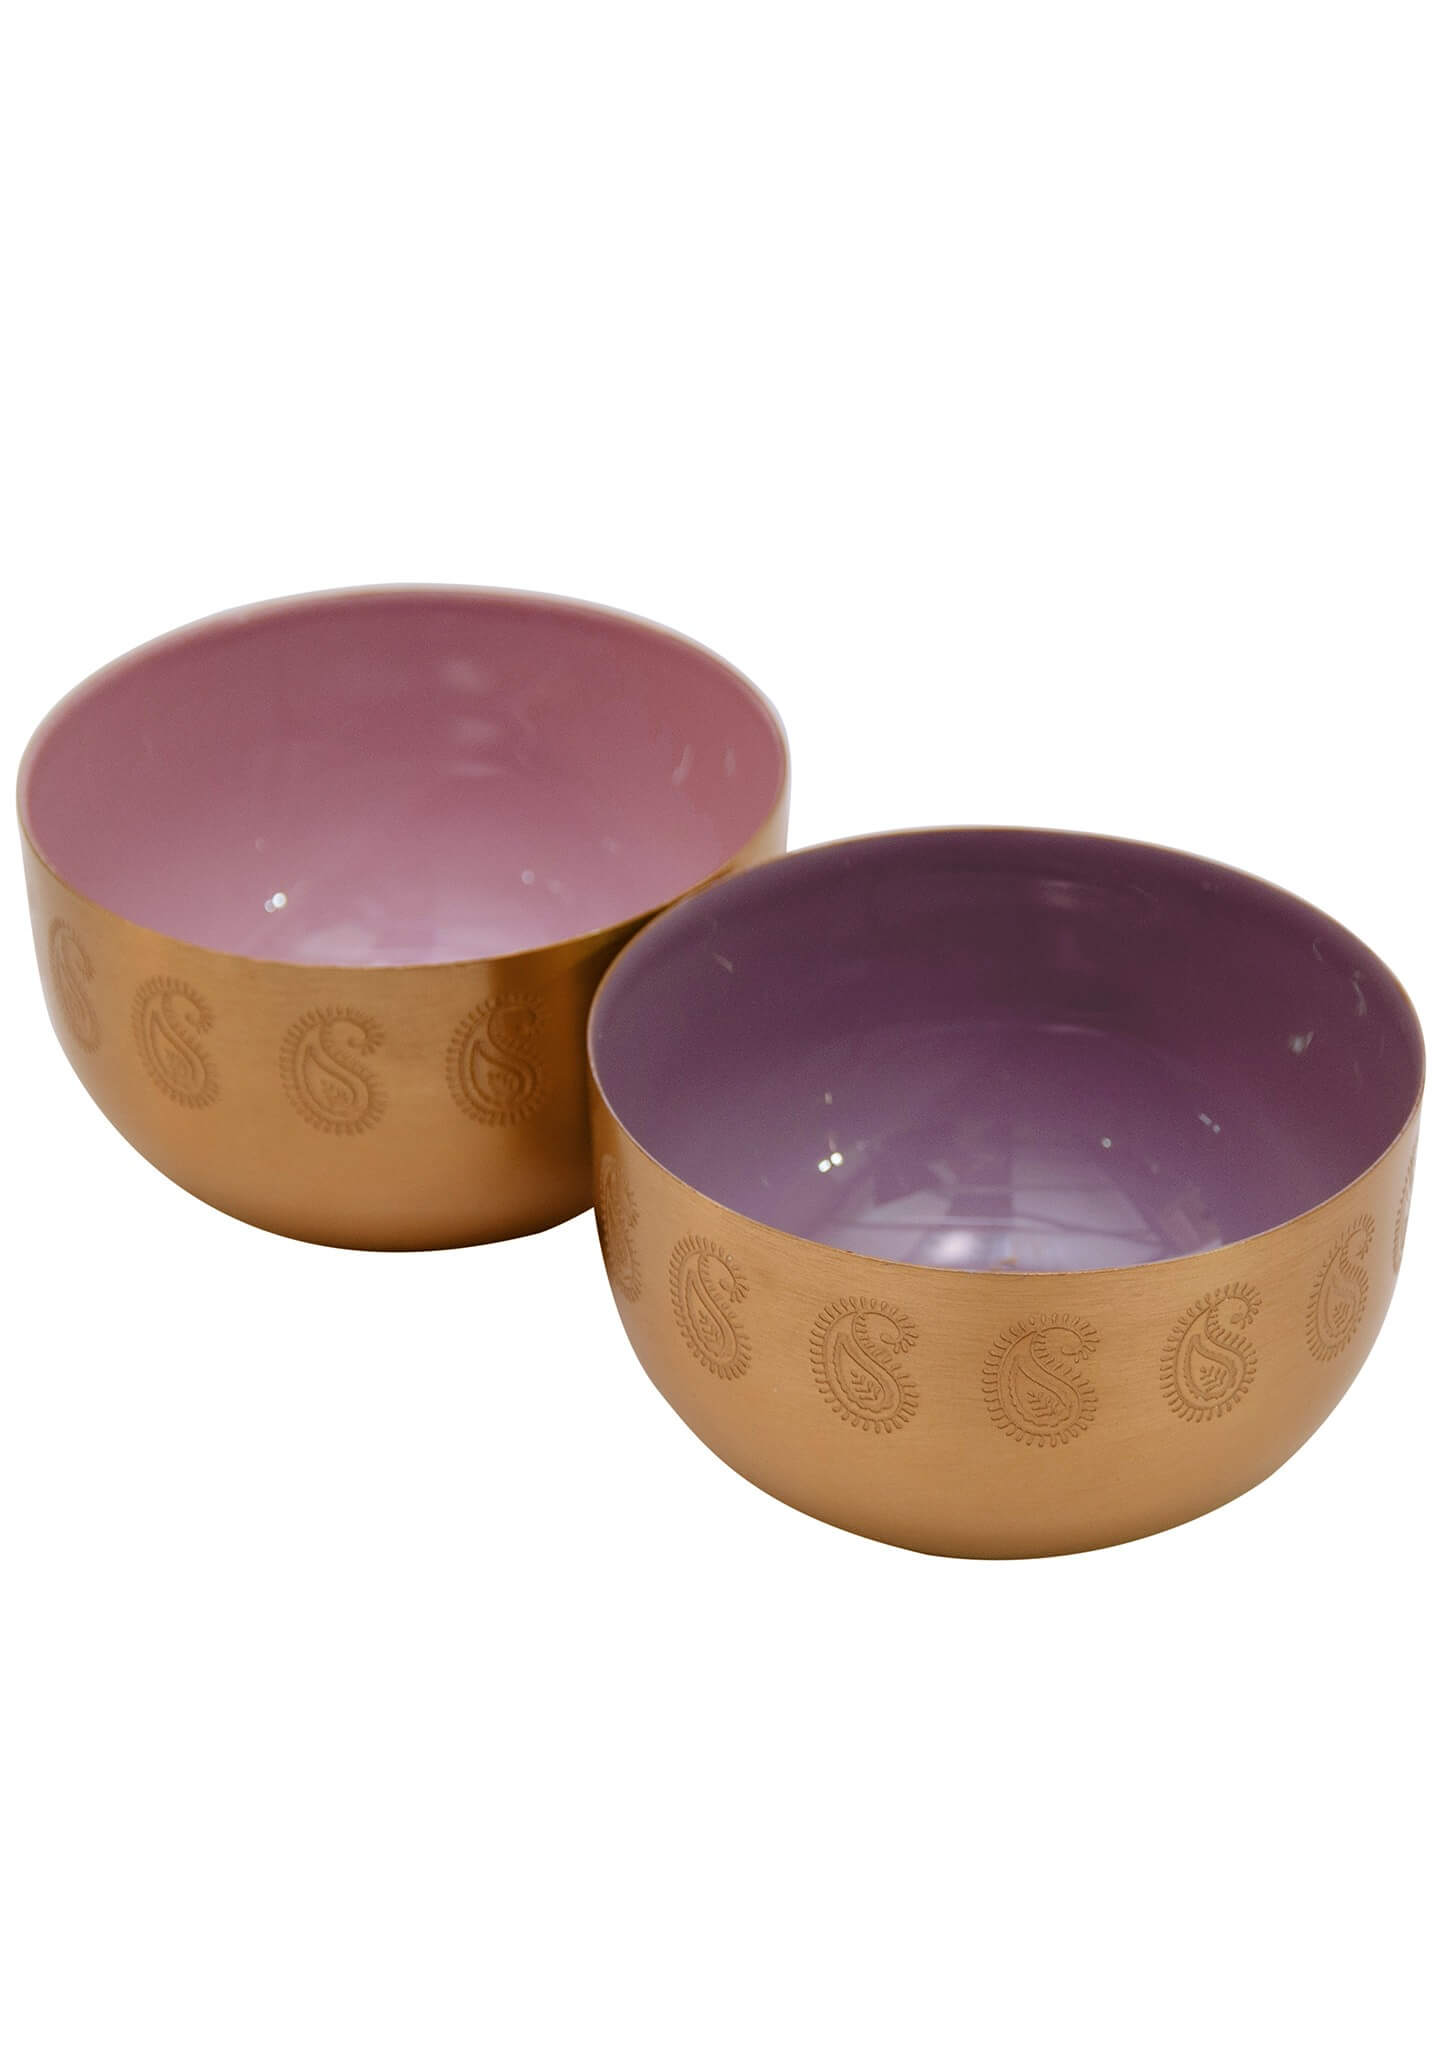 Paisley Etched Snack Bowl - small, purple